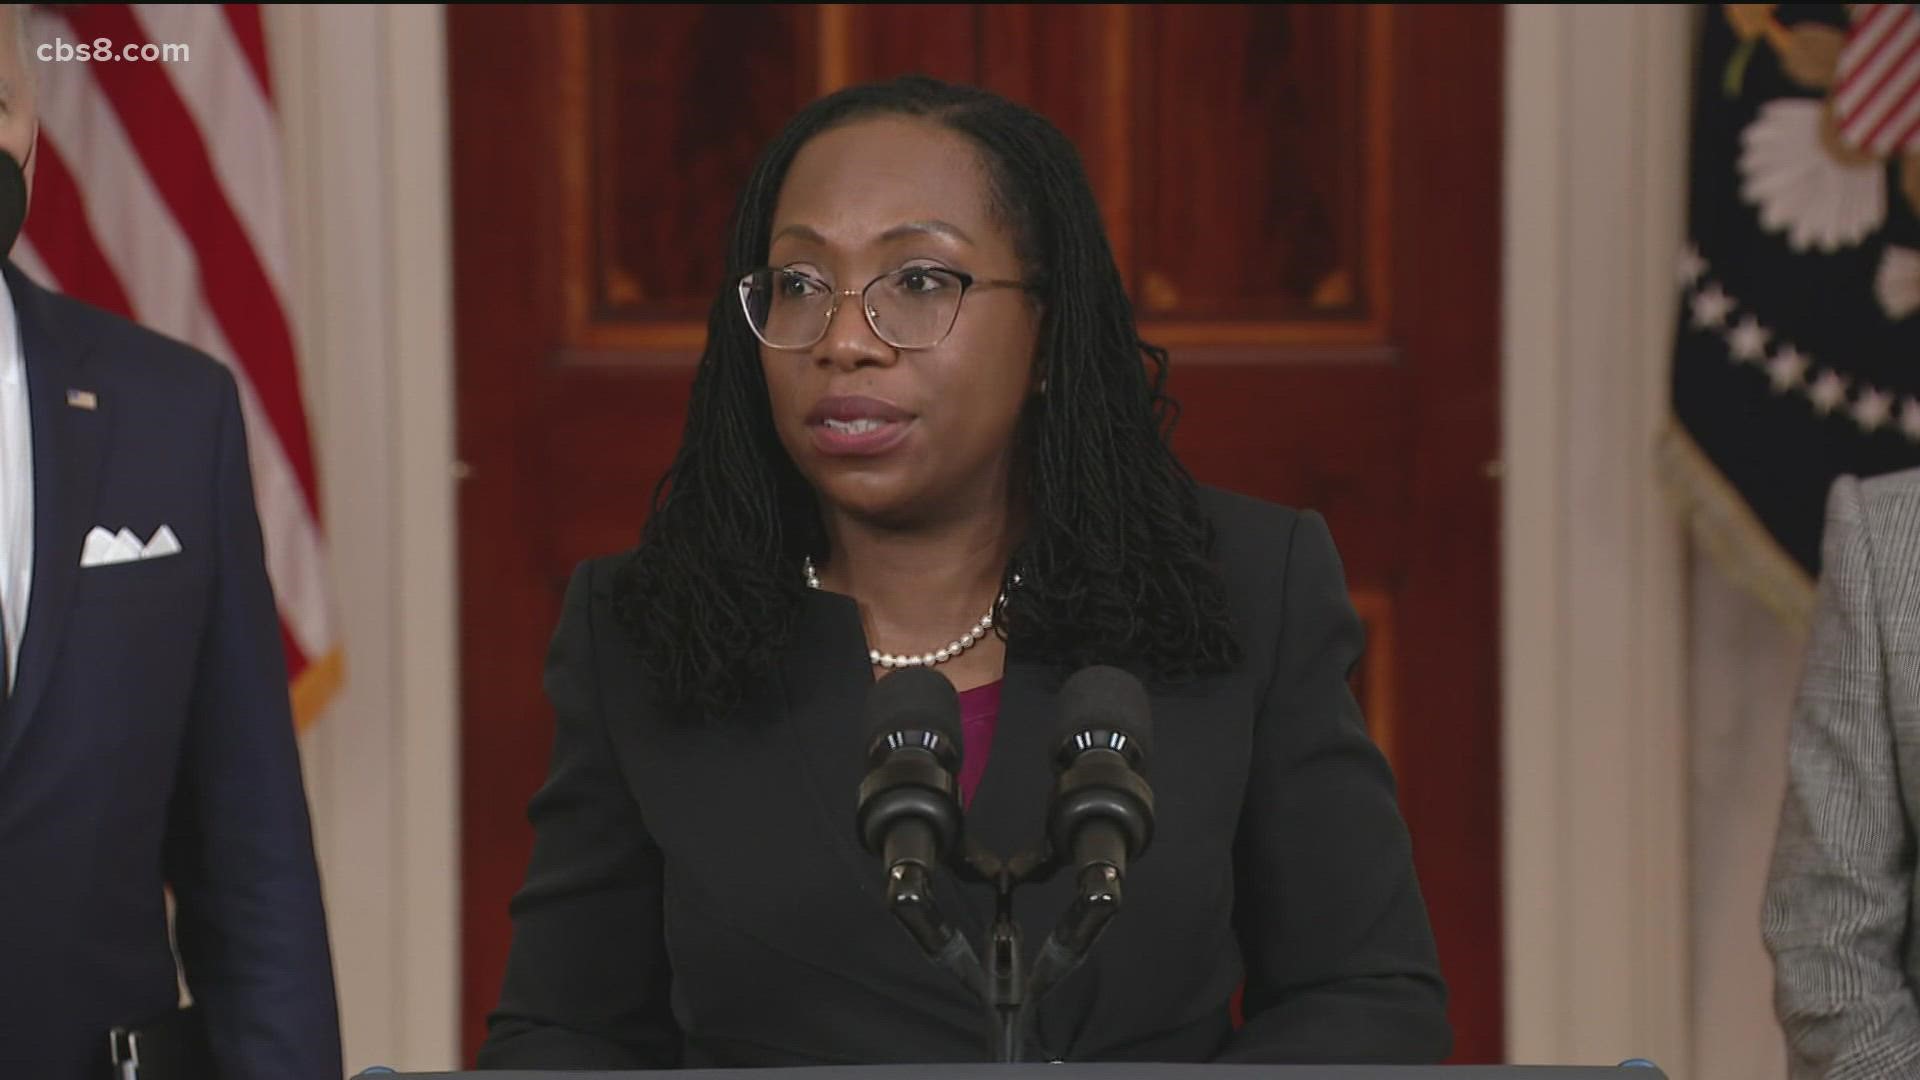 If confirmed, Ketanji Brown Jackson will become the first African American woman to sit on the Supreme Court.